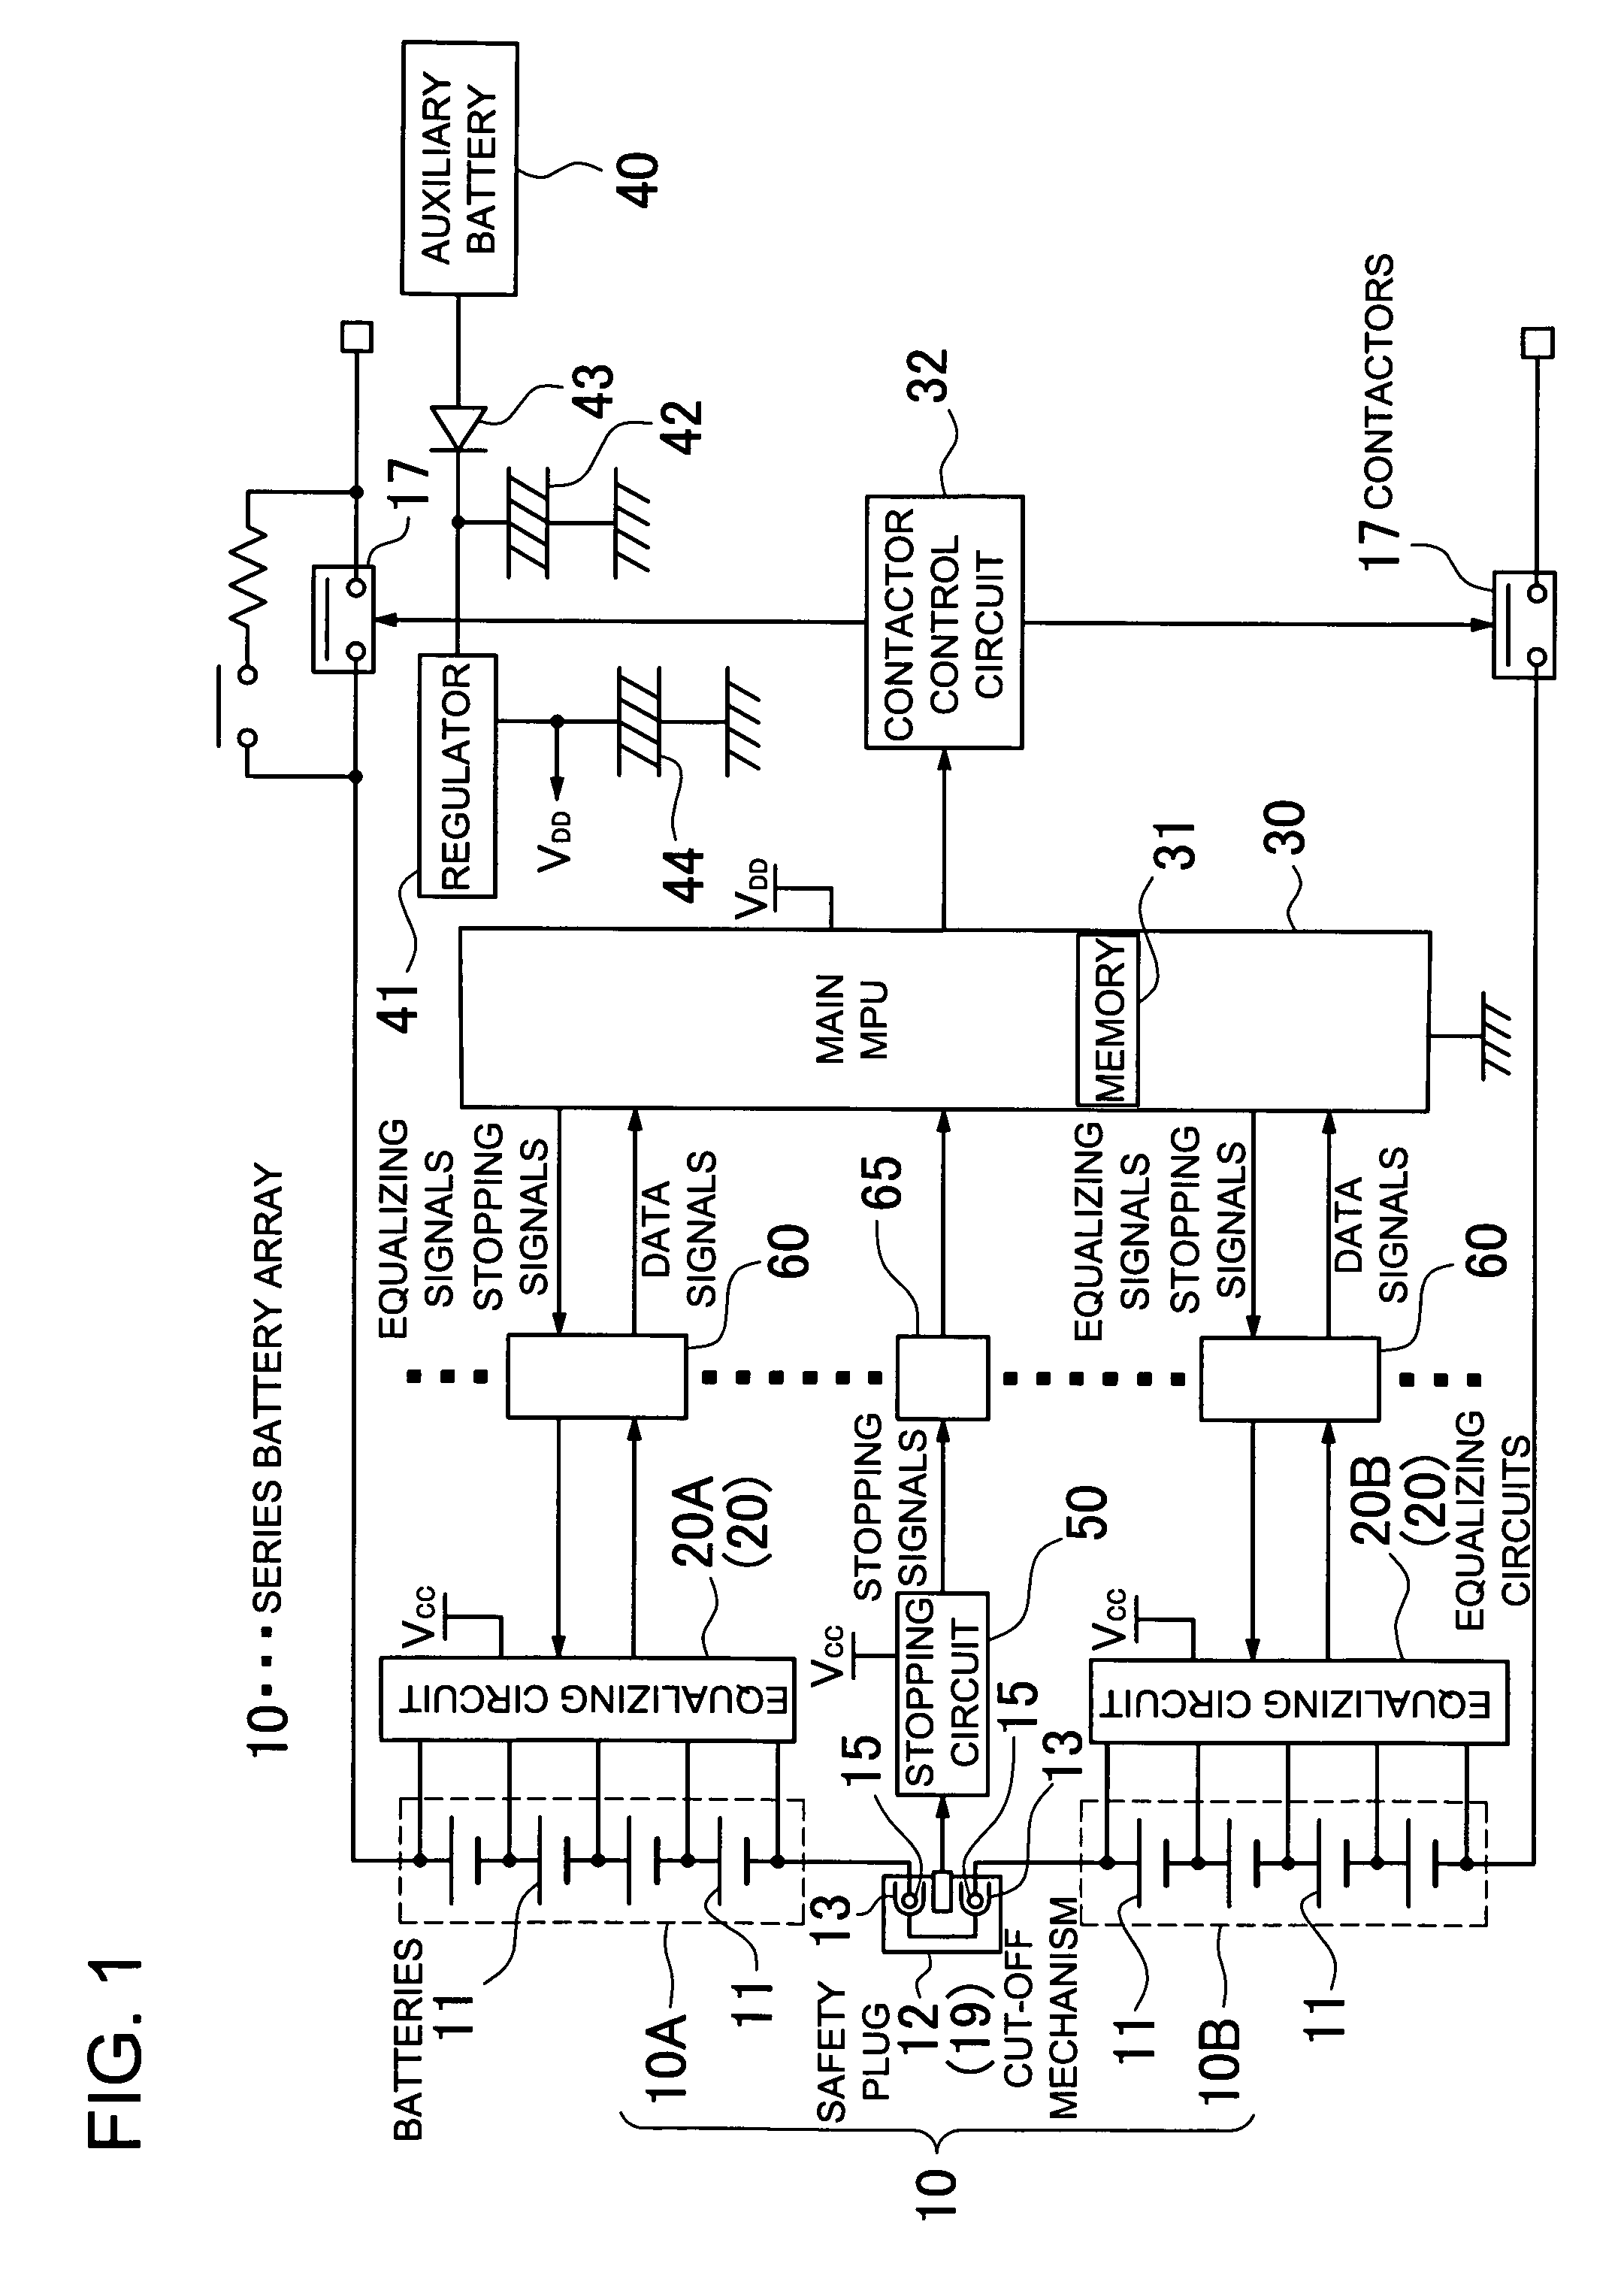 Car power source apparatus including removable cut-off mechanism to stop equalizing batteries